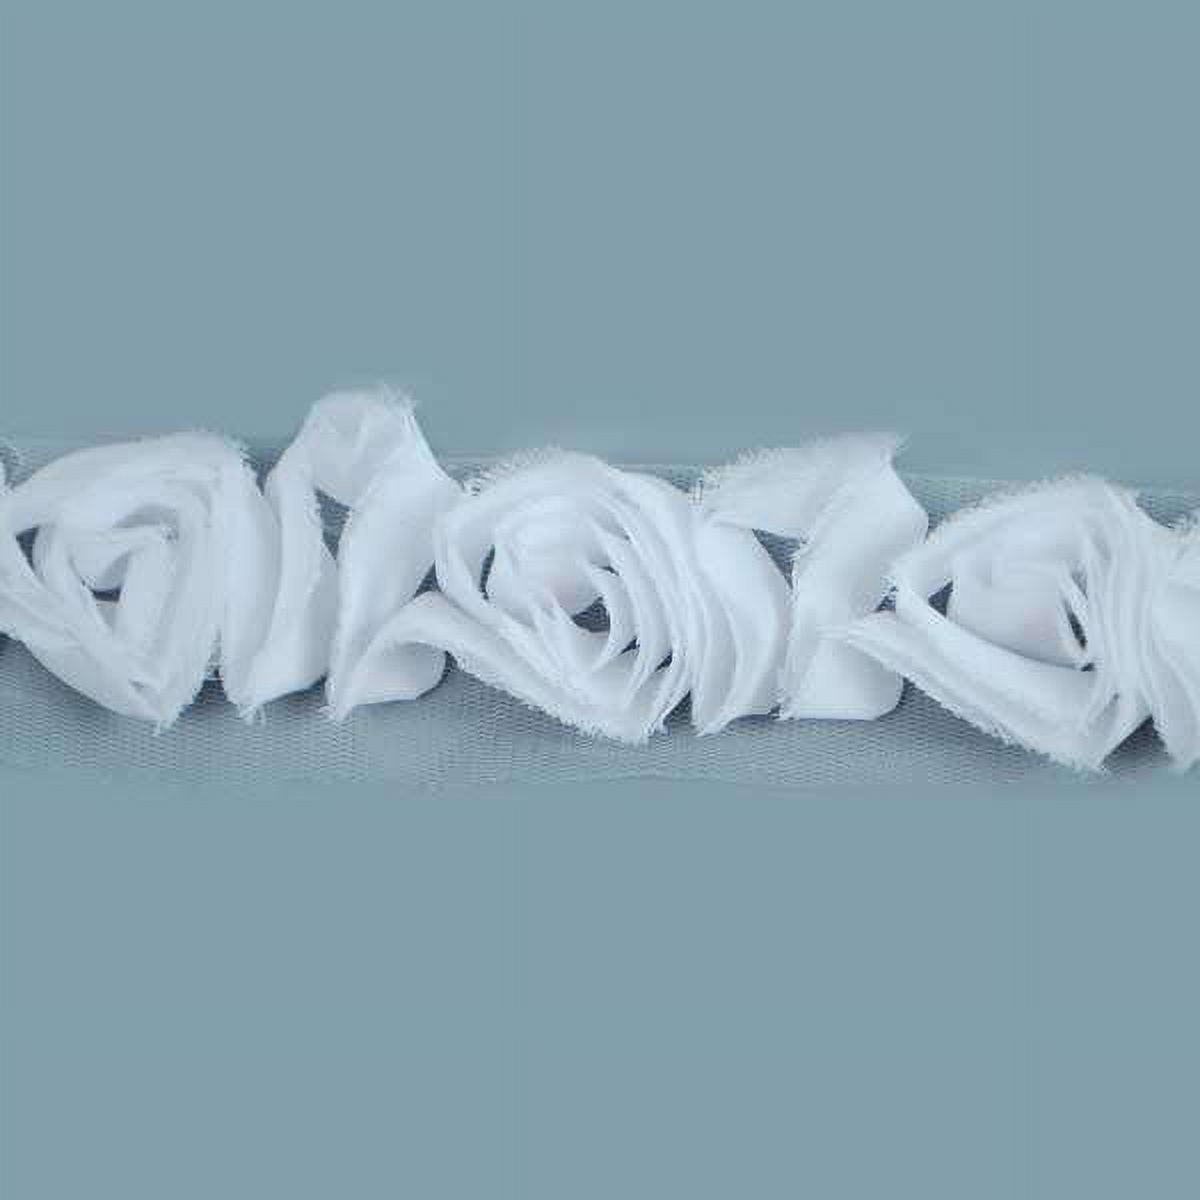 David accessories White Cotton Lace Trim Applique 5 Yards Sewing DIY Craft  Flower Lace DIY Ribbon January